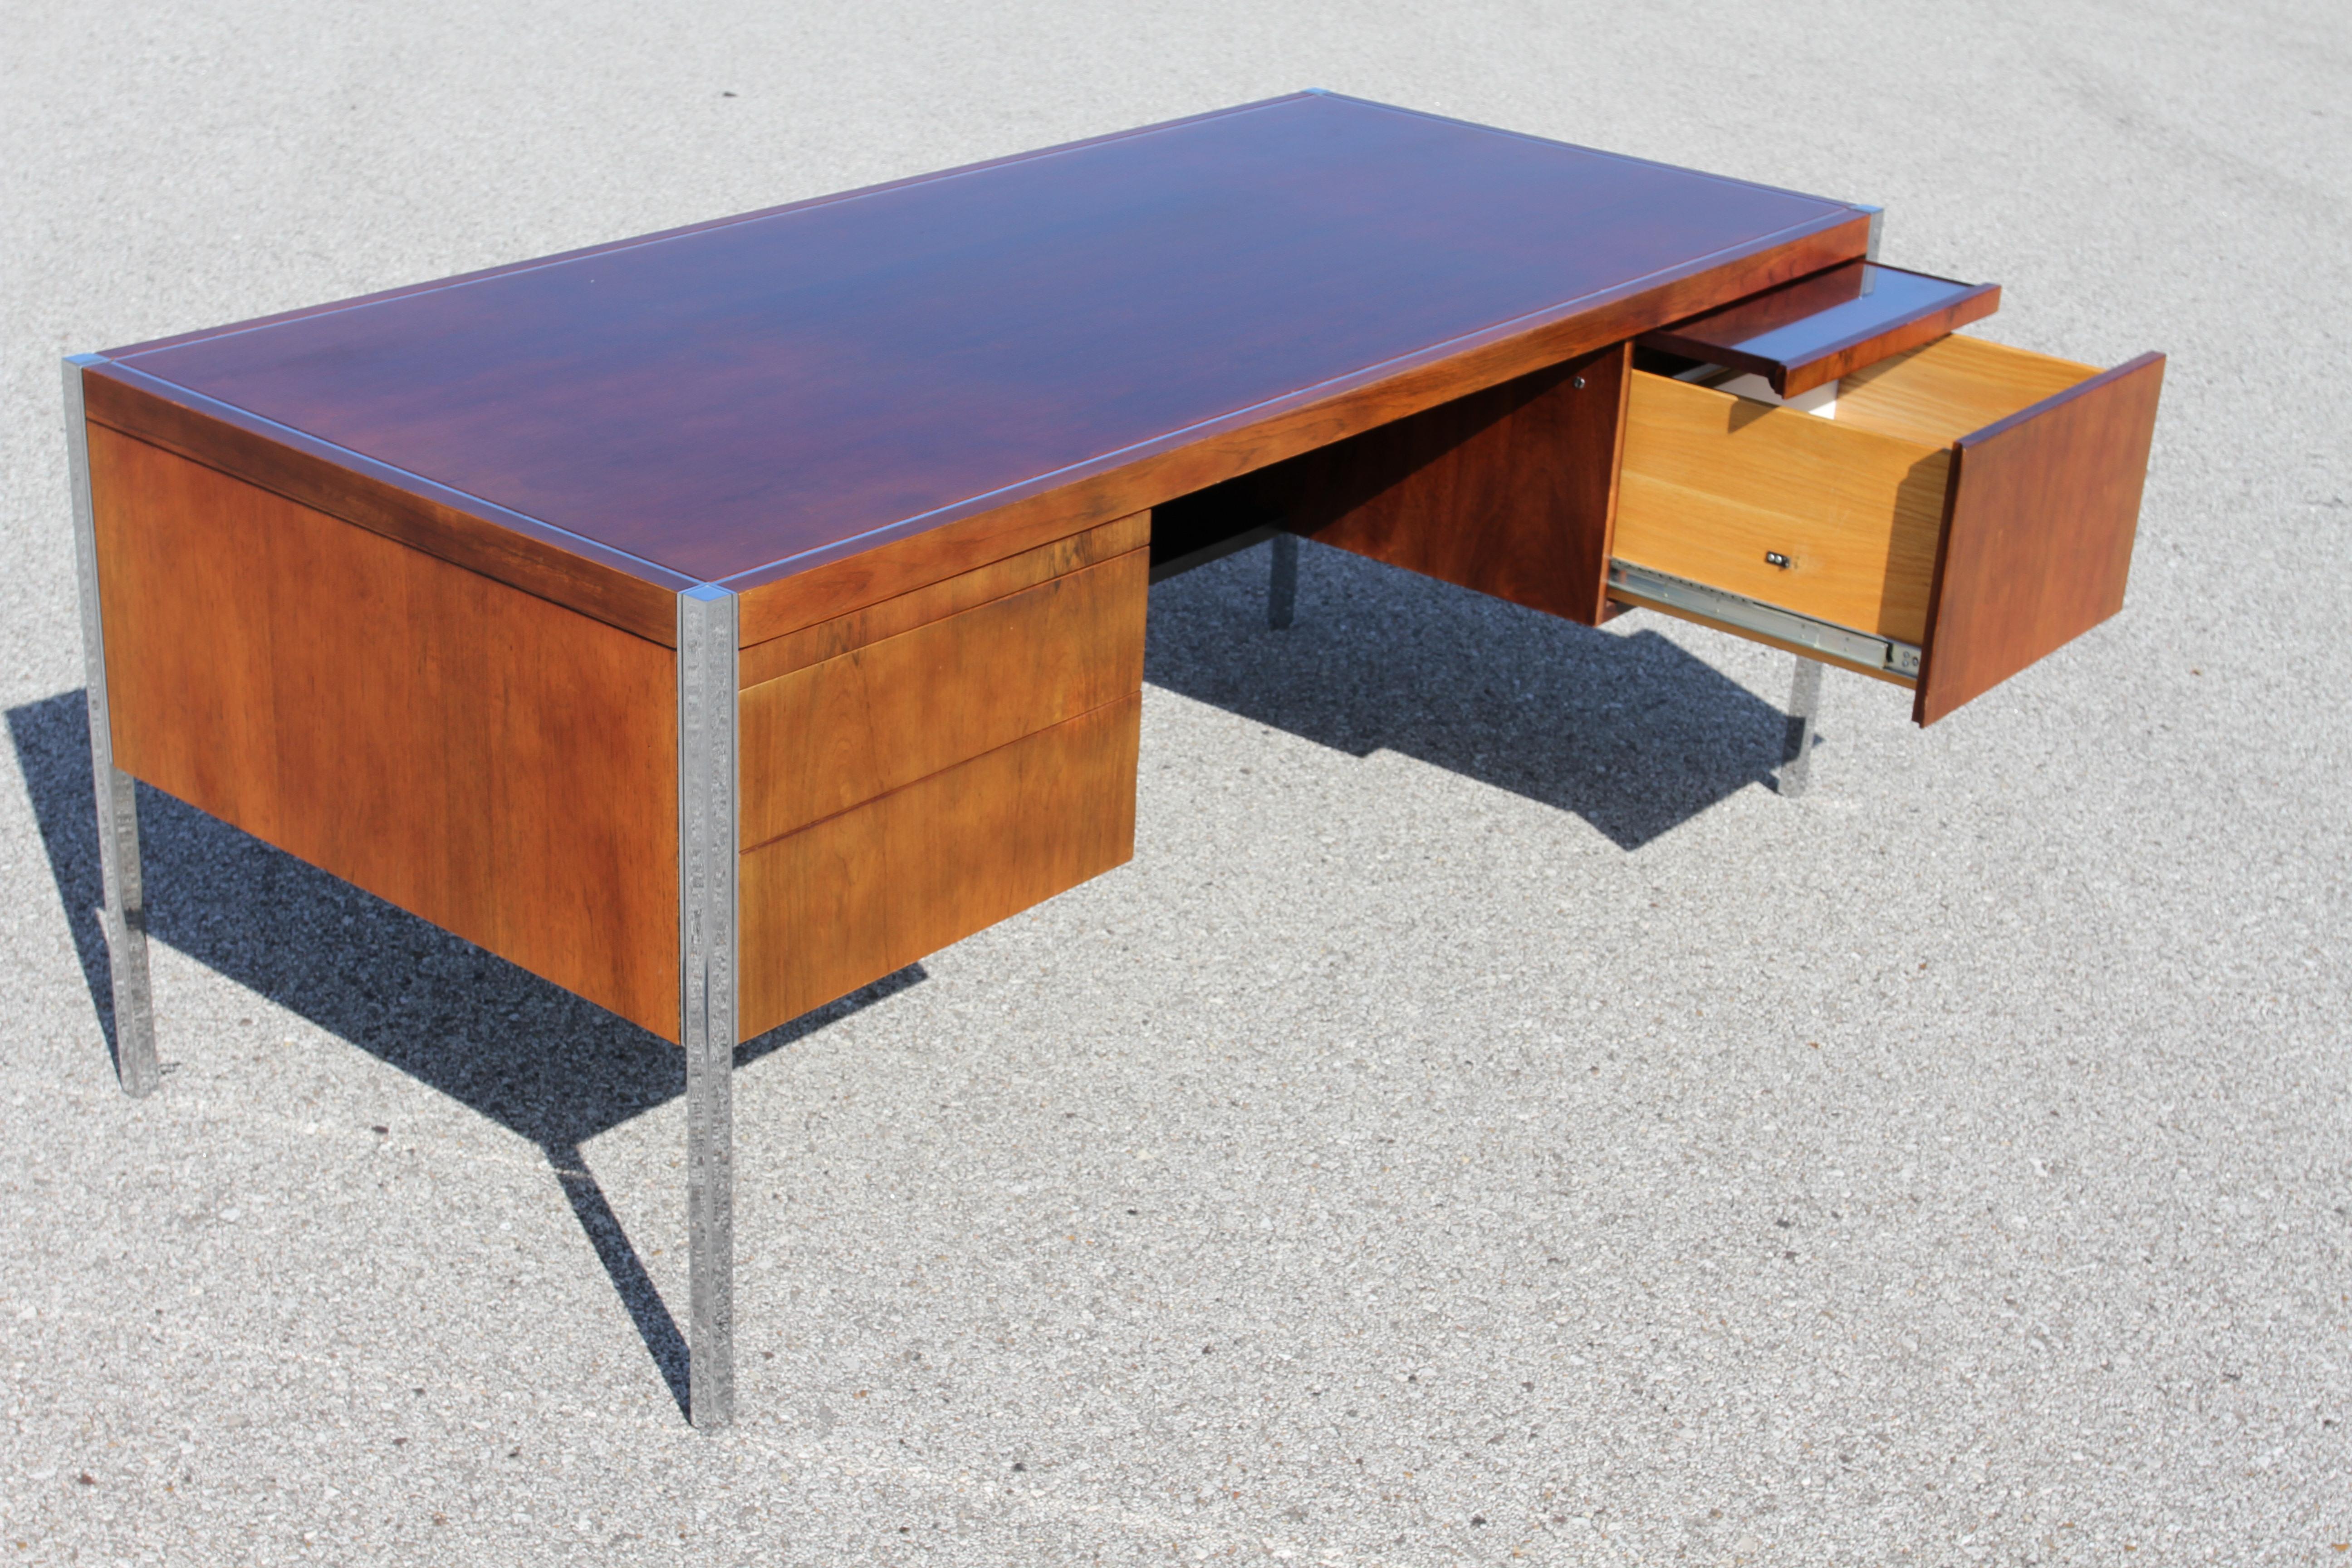 Mid-20th Century Richard Schultz for Knoll 1960s Mid-Century Modern Rosewood Executive Desk #4146 For Sale